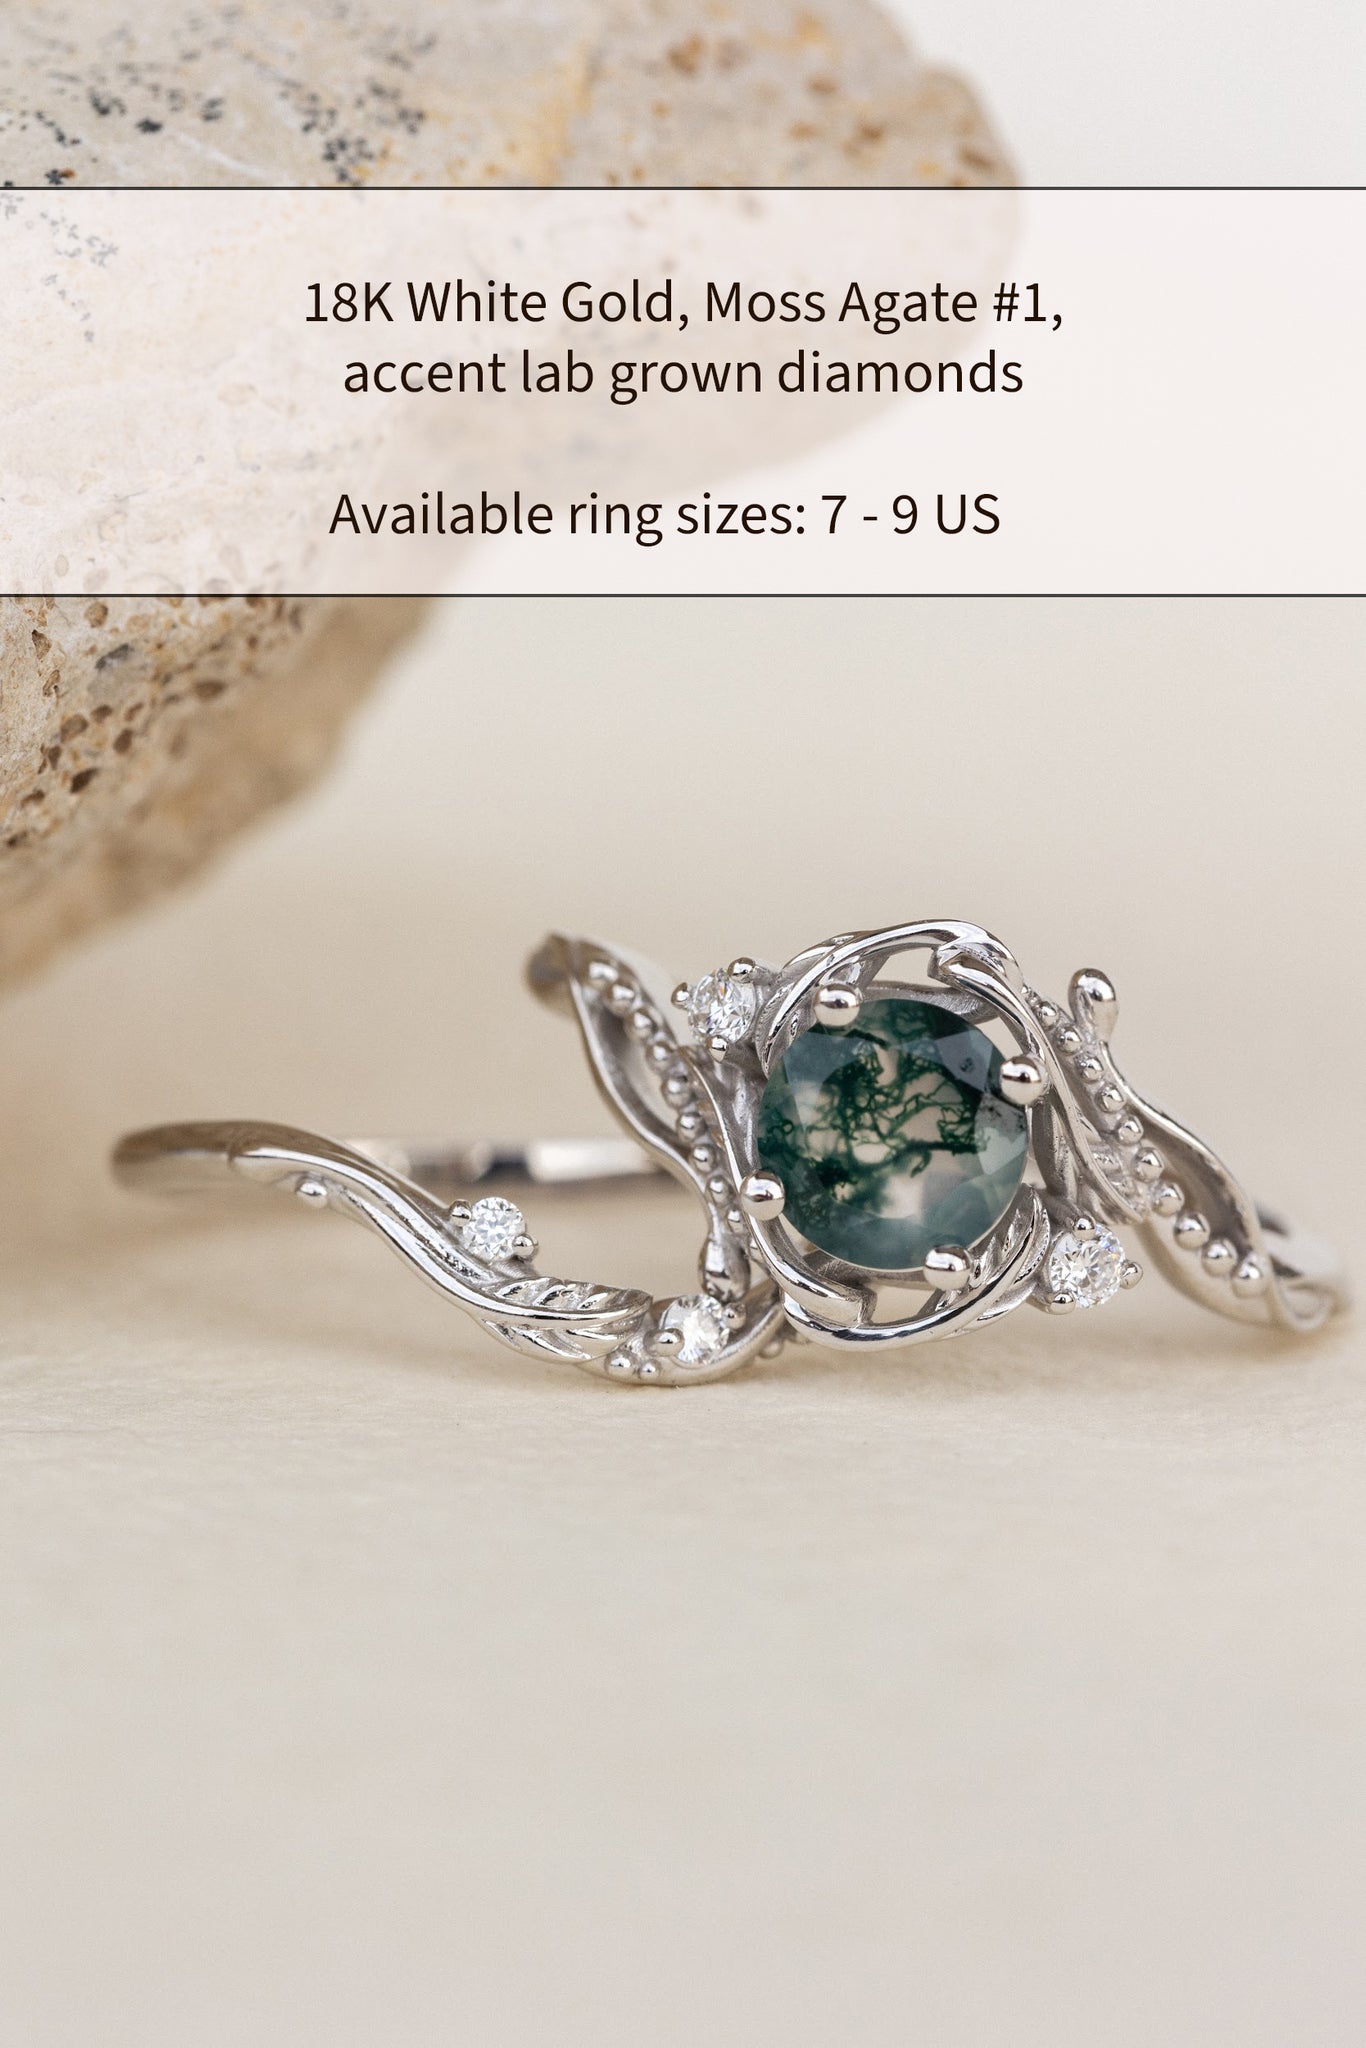 READY TO SHIP: Hypnotic Undina set with natural moss agate in 14K or 18K white gold with diamonds, AVAILABLE RING SIZES: 7-9 US